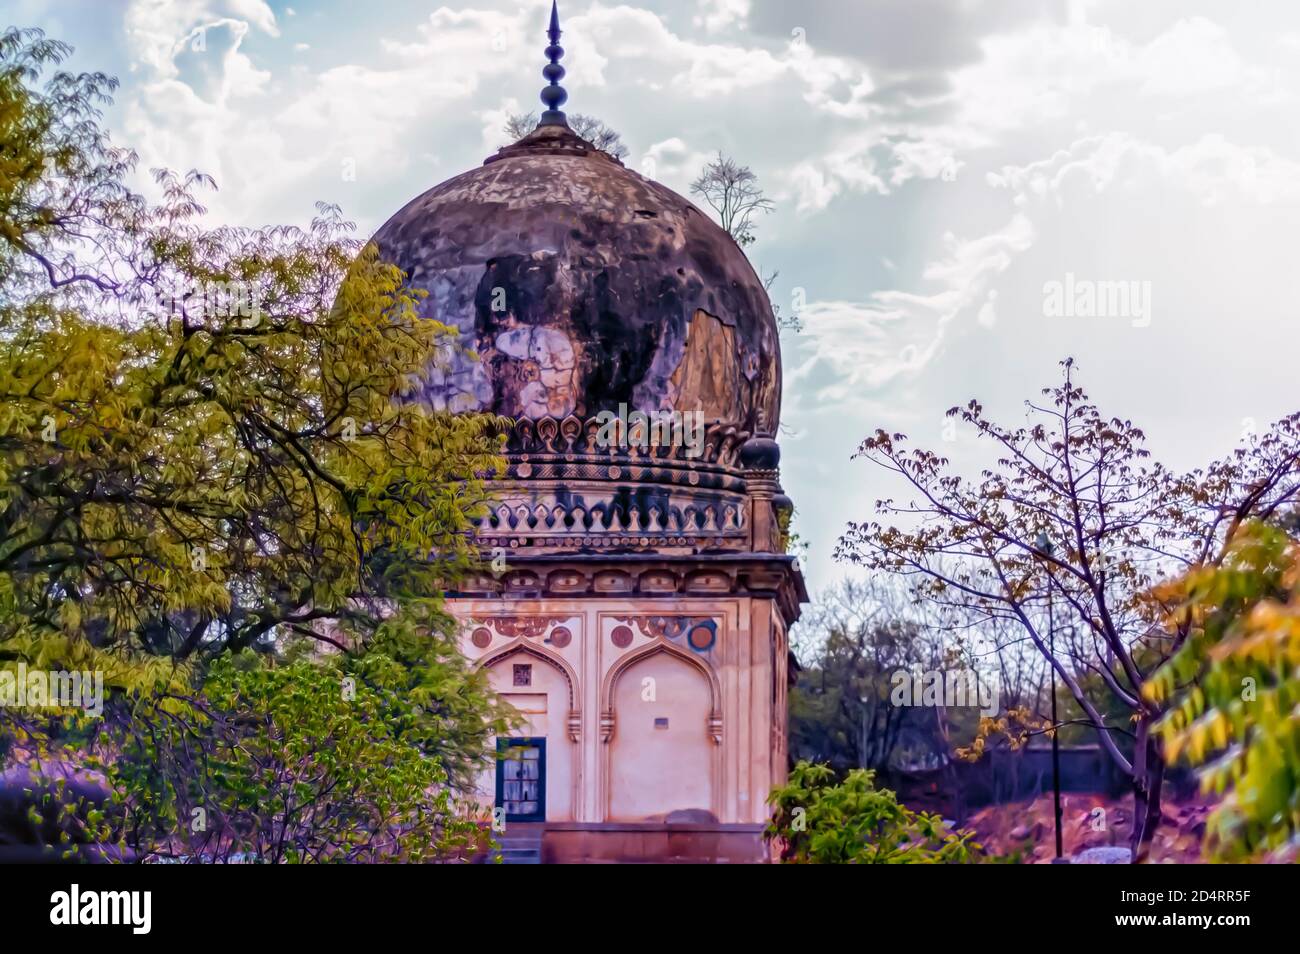 Il mausoleo di Hayat Bakshi Begum nel complesso delle Tombe Qutb Shahi situato a Ibrahim Bagh a Hyderabad, India. Foto Stock